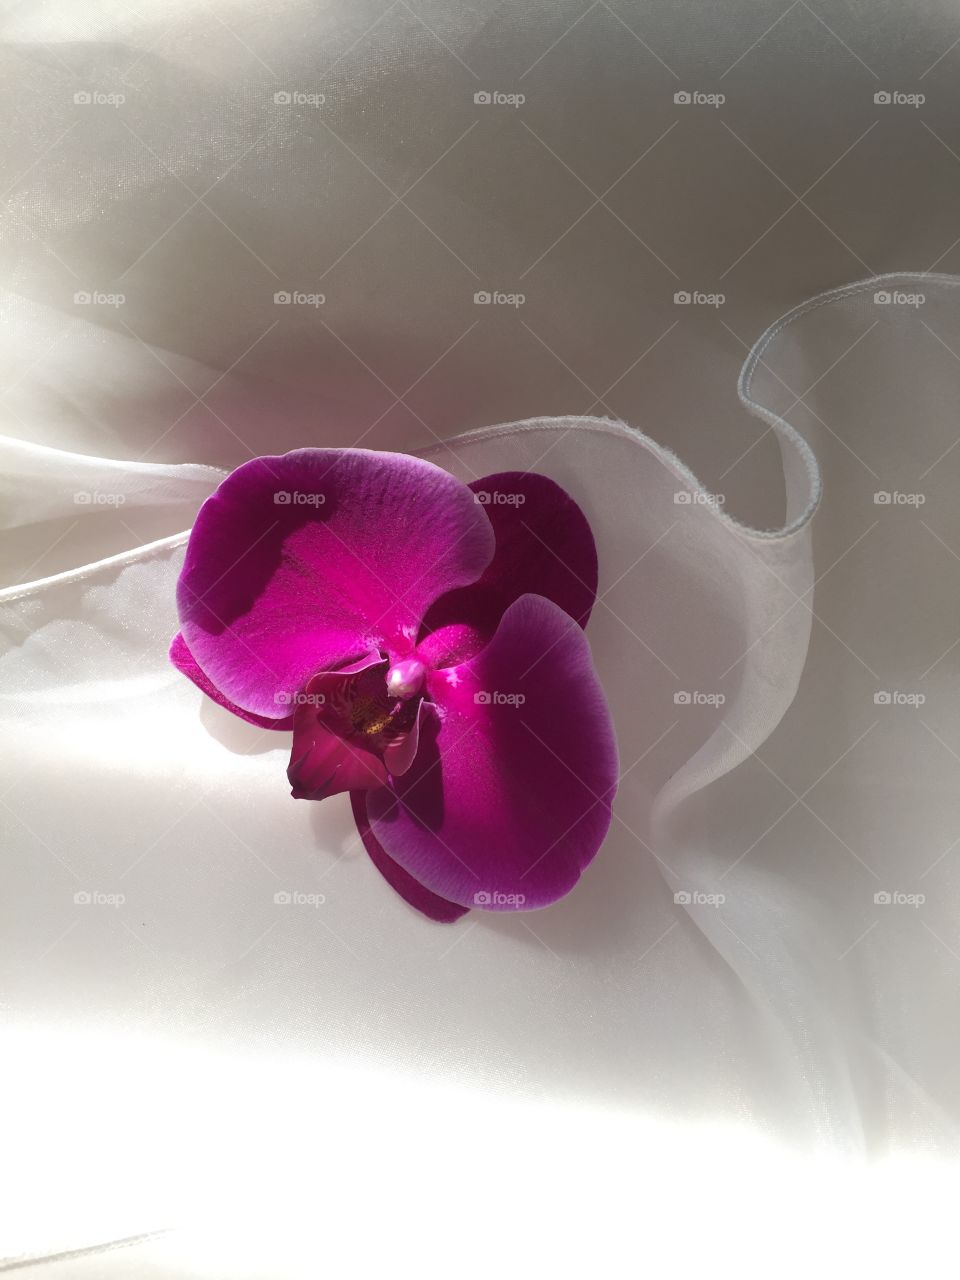 Orchid on wedding dress background. 